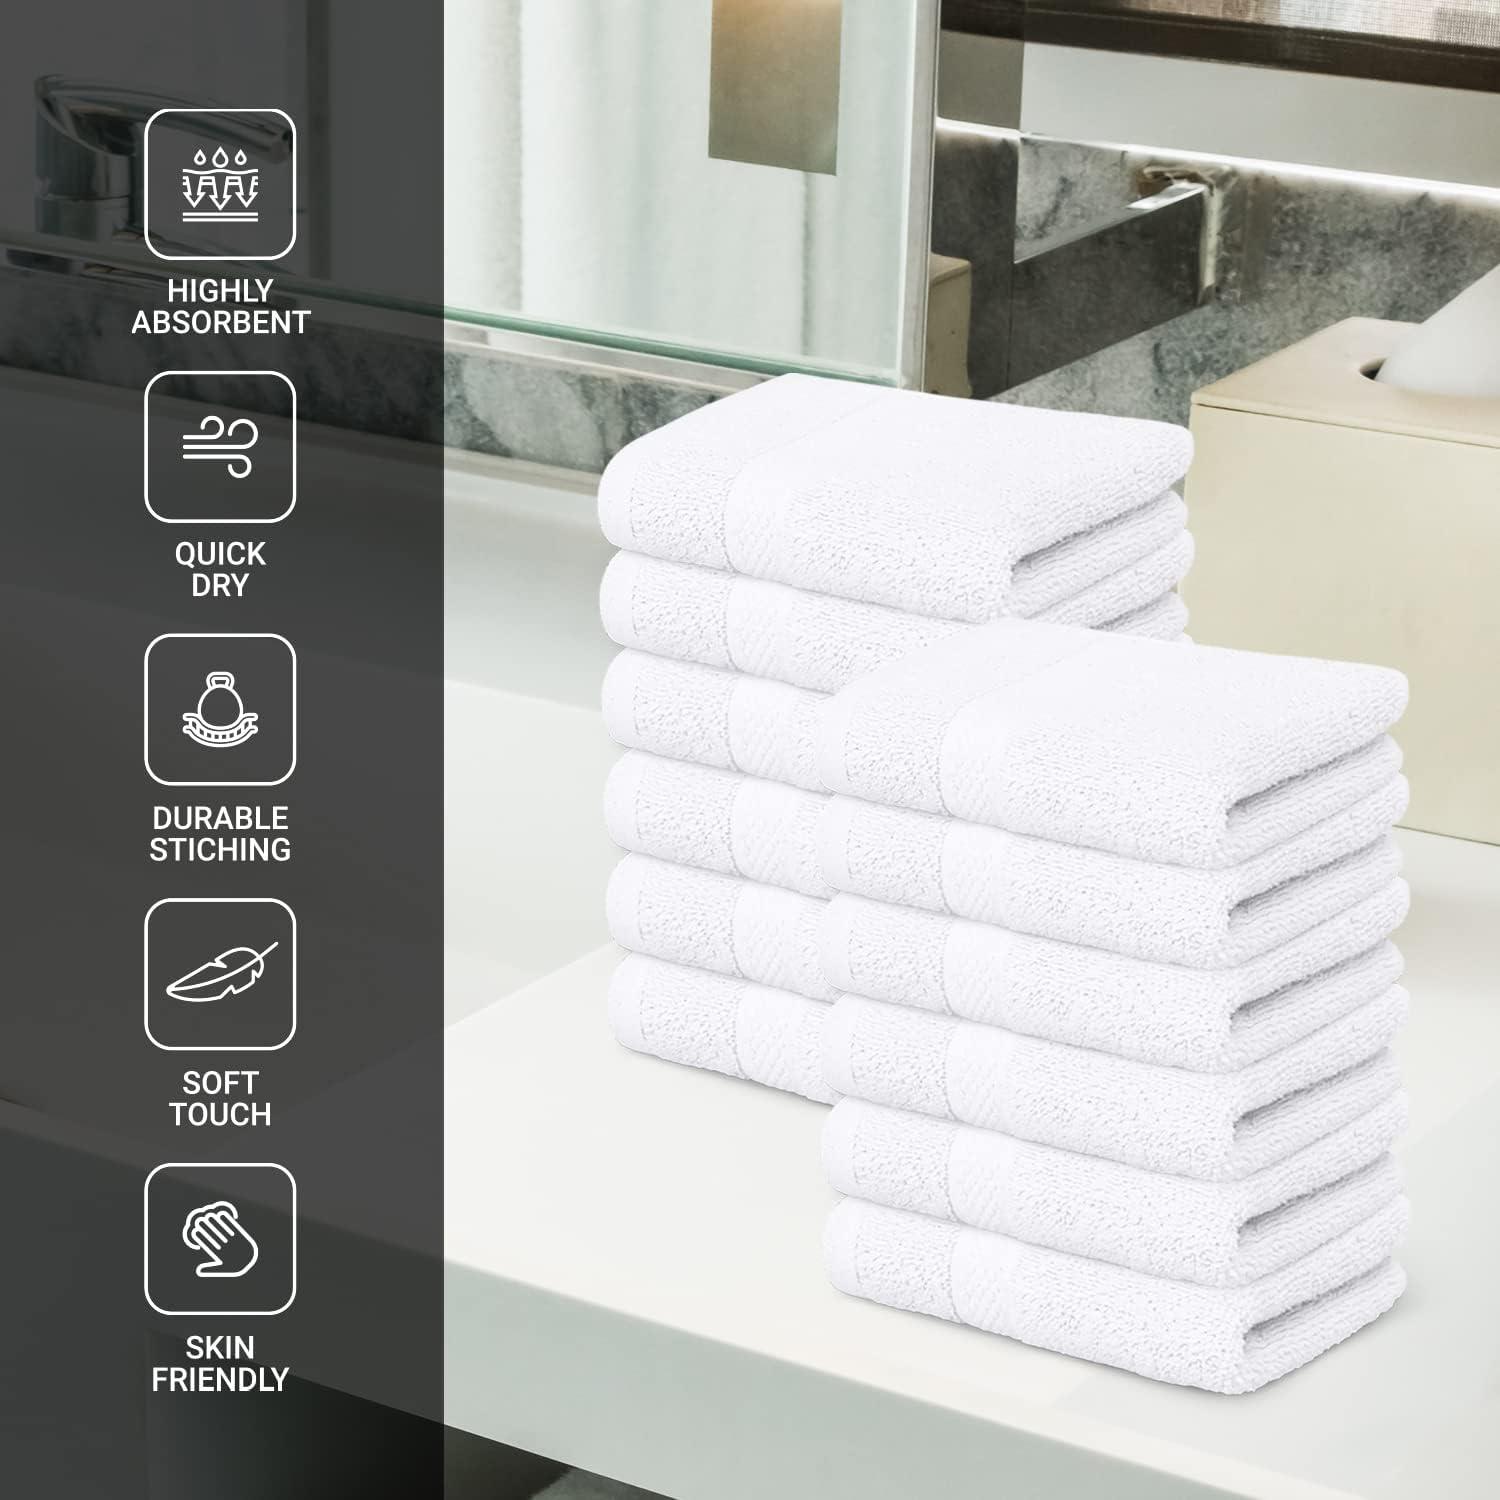 Infinitee Xclusives Premium White Washcloths Set Pack of 12, 13x13 Inches 100% Cotton Wash Cloths for Your Body and Face Towels, Kitchen Dish Towels